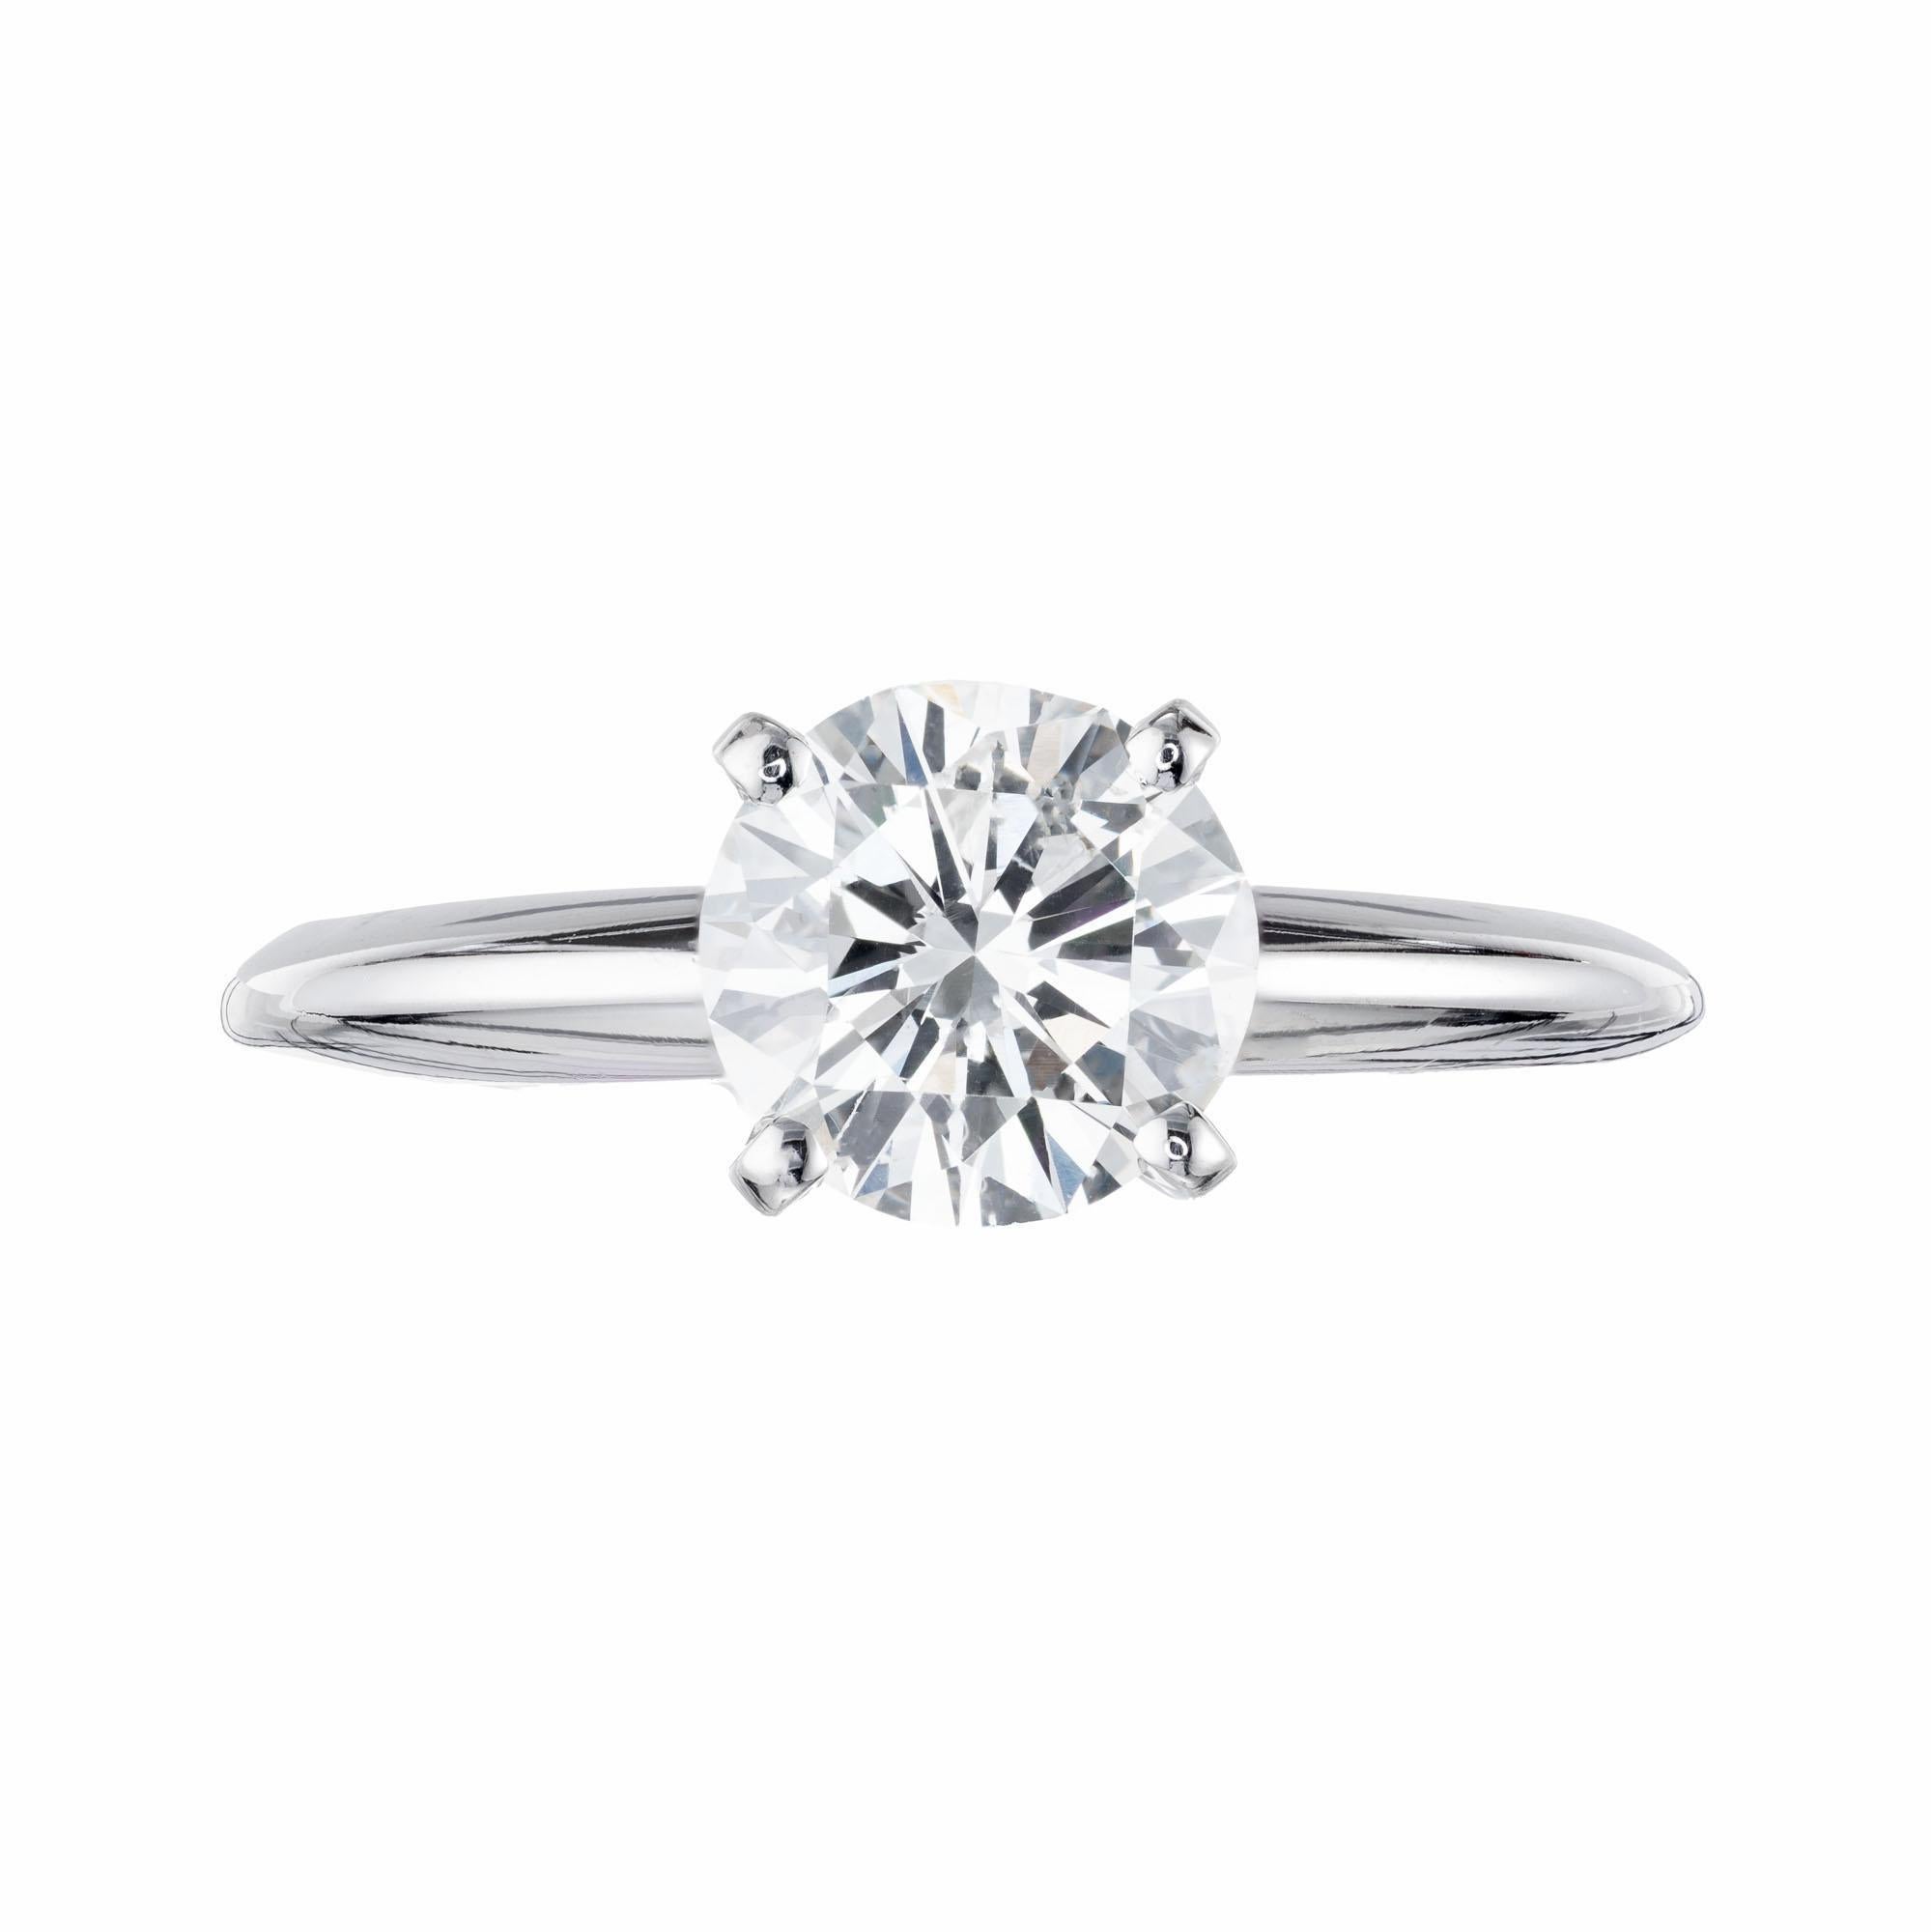 Bright white diamond engagement ring. 1.15 carat EGL certified, and laser inscribed. Clarity enhanced-no flaws visible to the eye

1 round brilliant cut diamond I-J SI3, approx. 1.15cts EGL Certificate # US400133358D
Size 6 and sizable
14k white